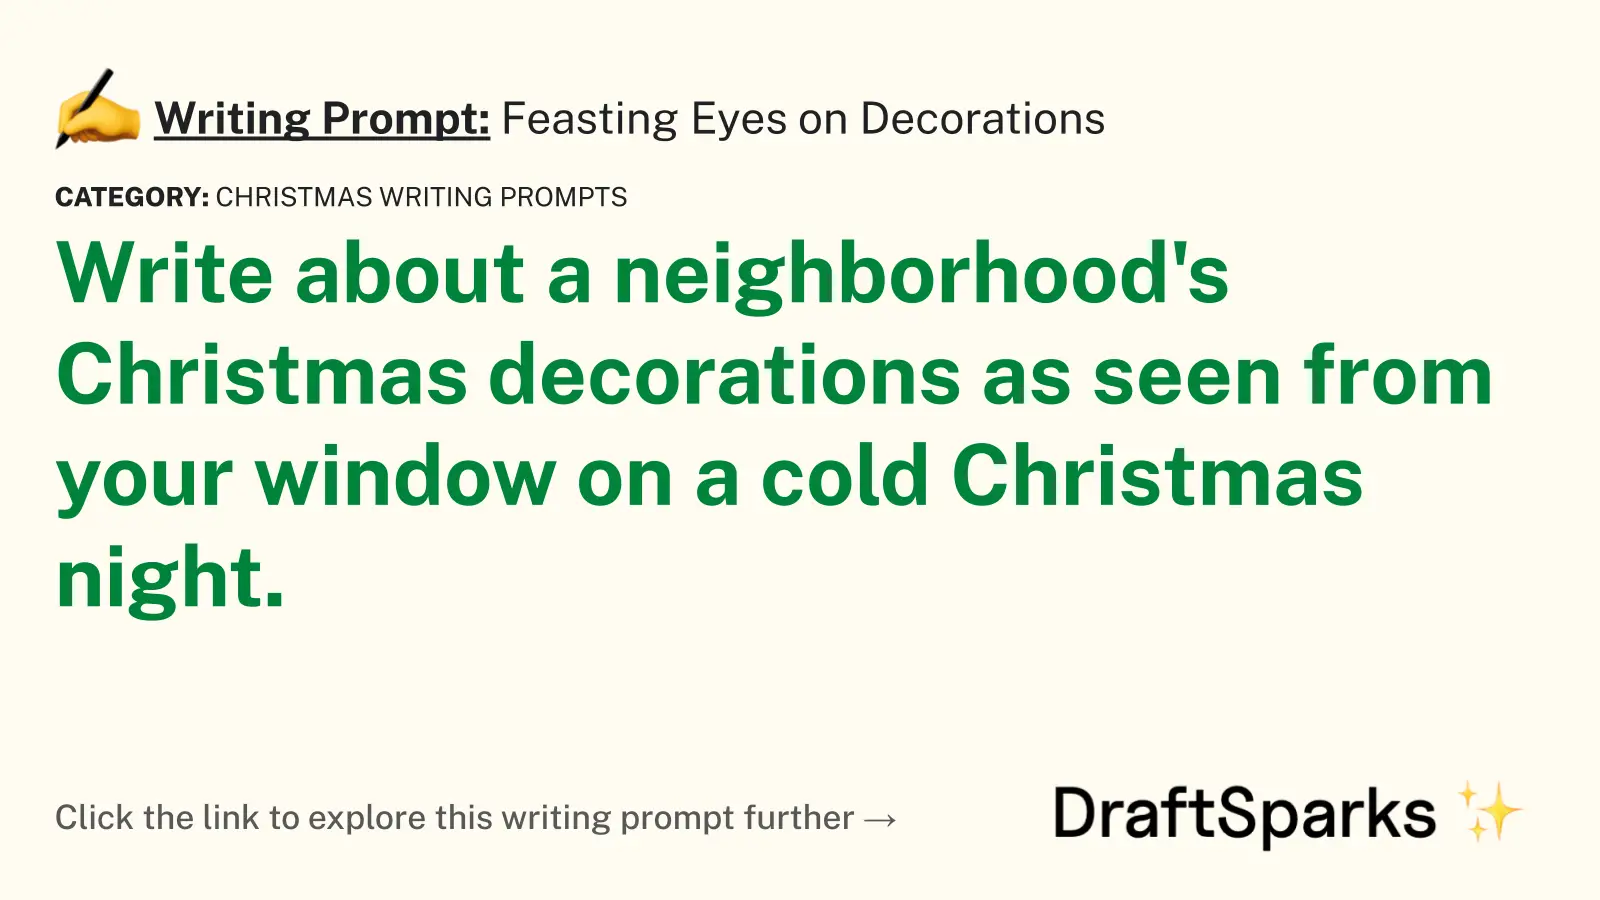 Feasting Eyes on Decorations